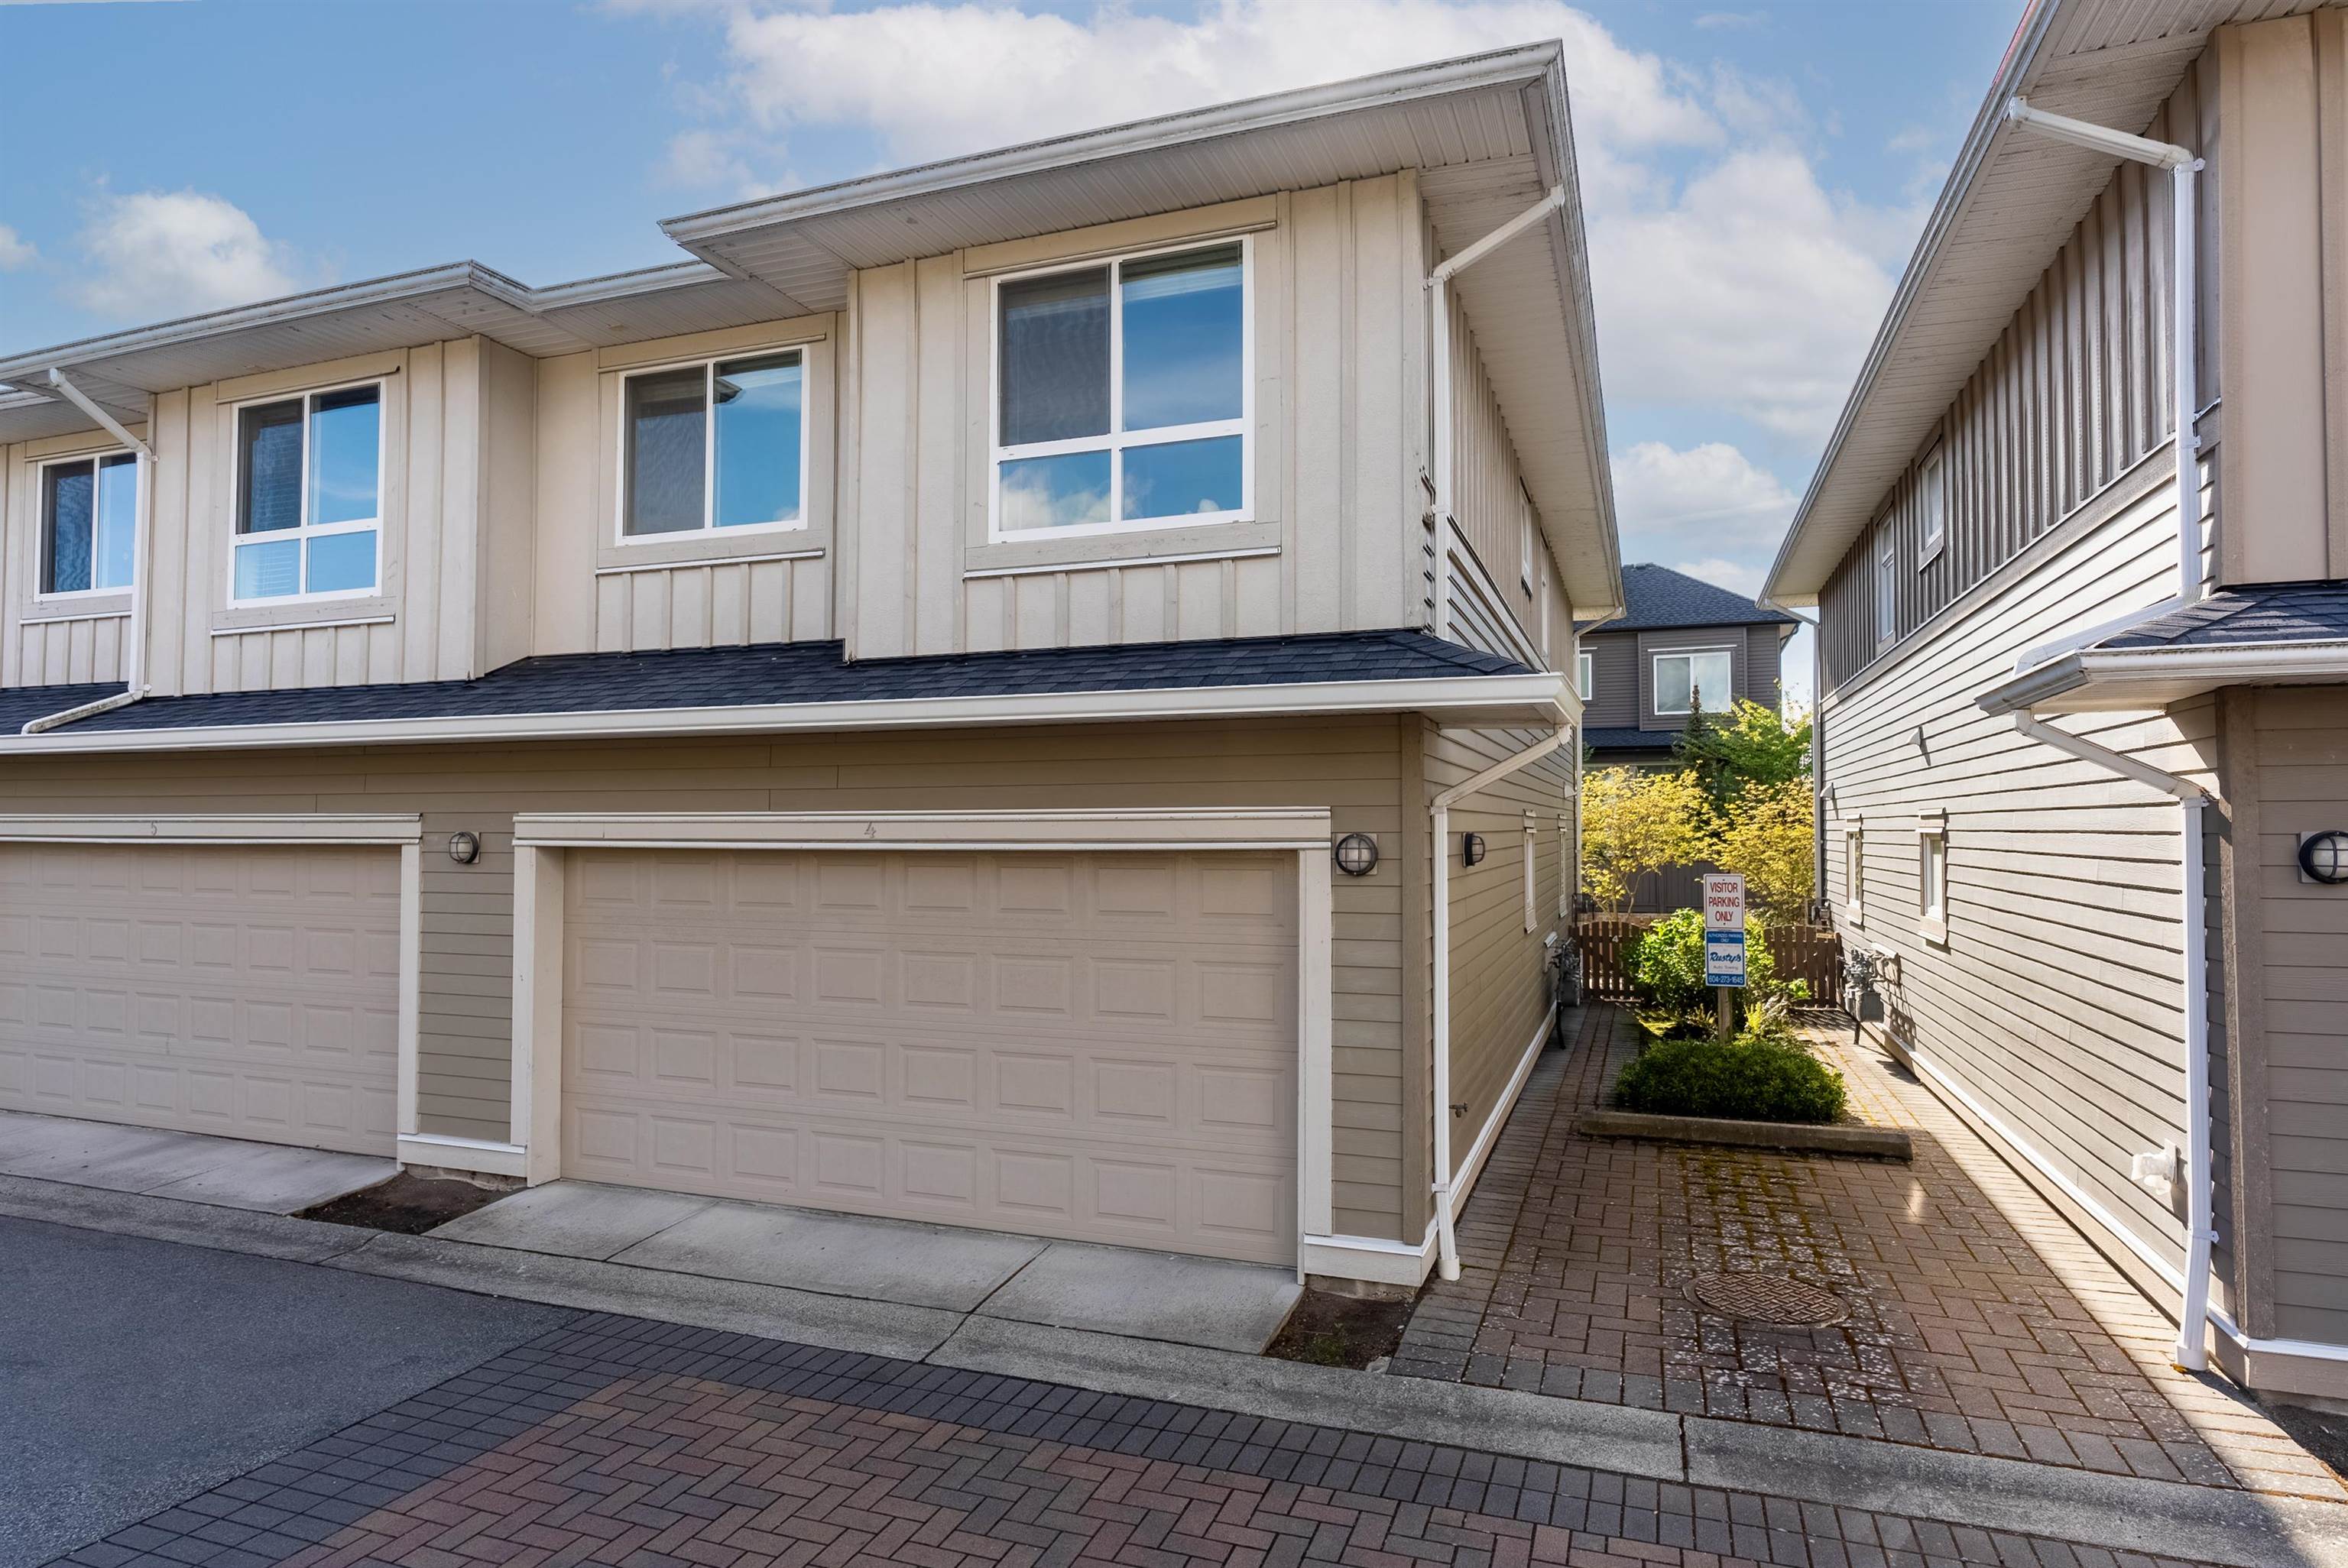 Steveston South Townhouse for sale:  3 bedroom 1,318 sq.ft. (Listed 4000-05-19)